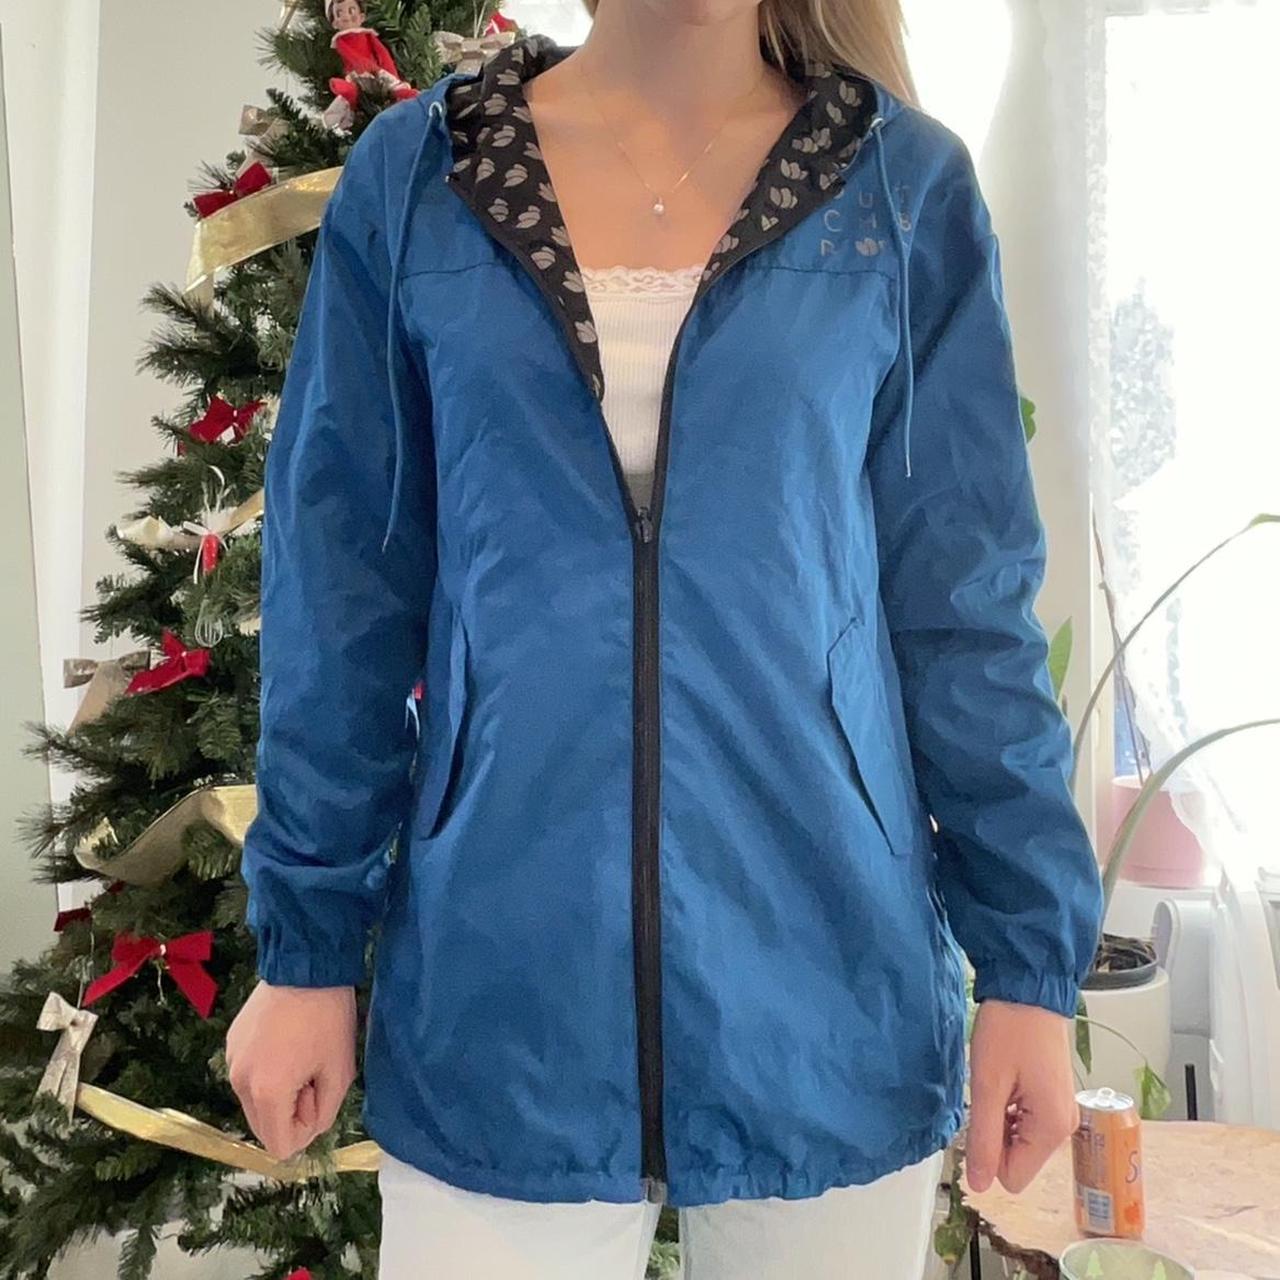 Coffee Shop Women's Blue and Black Jacket